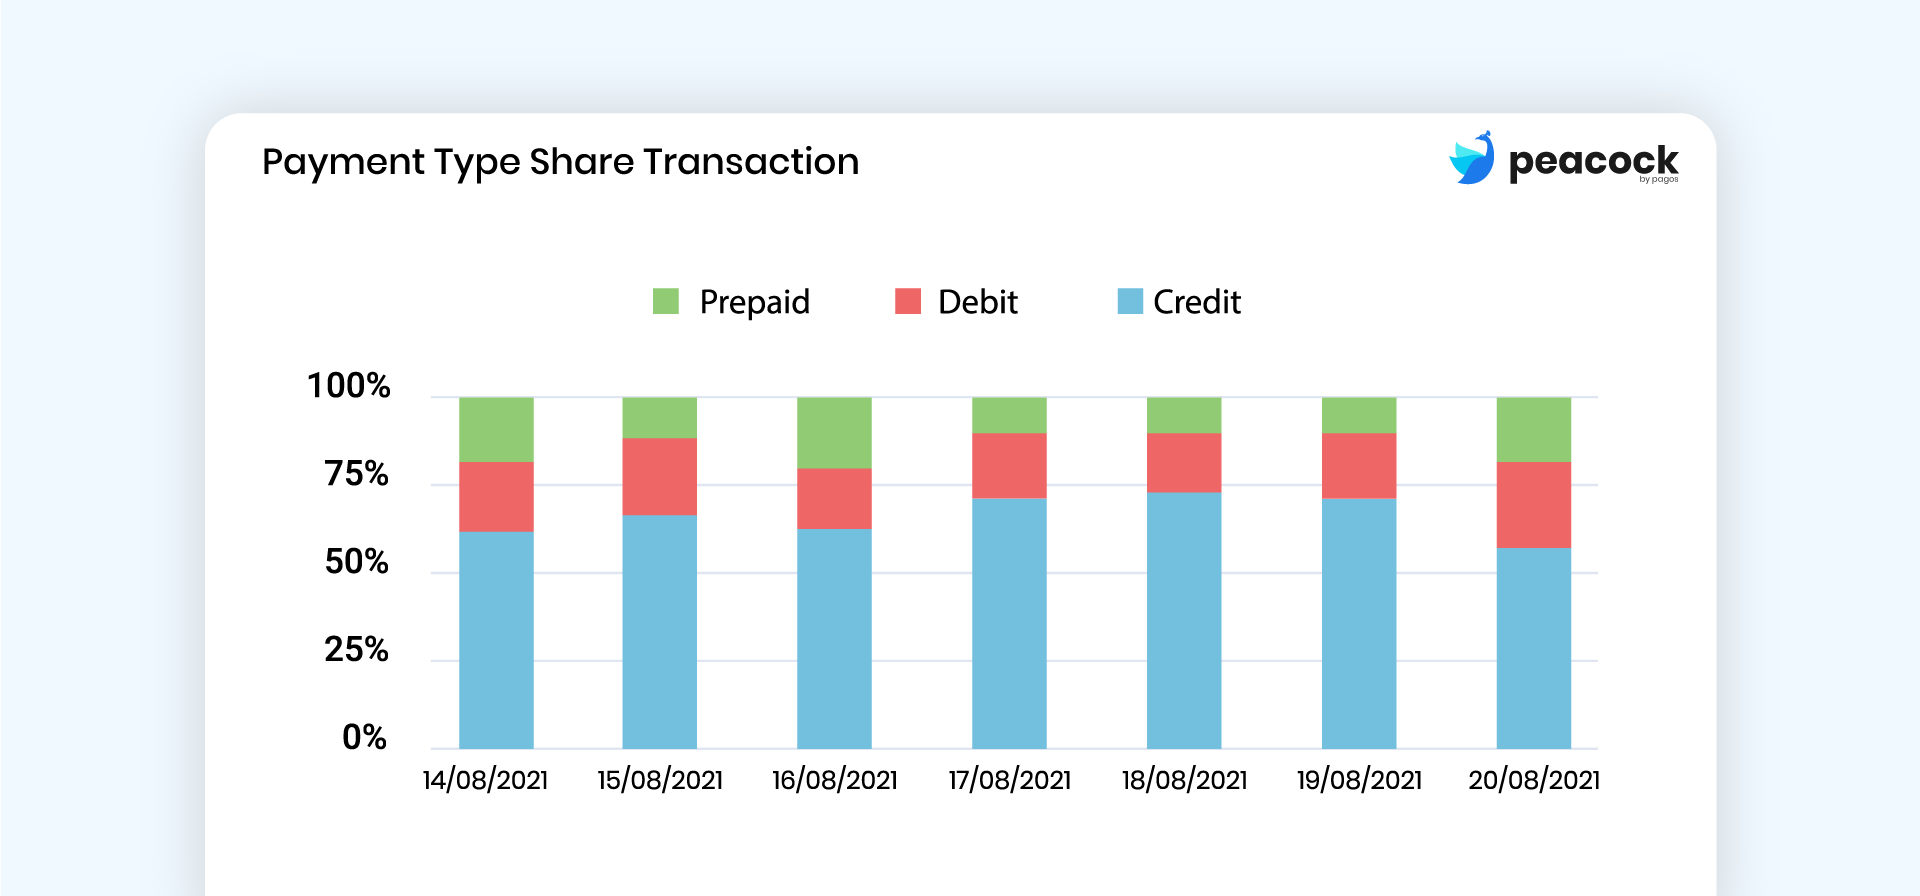 Payment type chart illustrating distribution of prepaid, debit, and credit cards by day